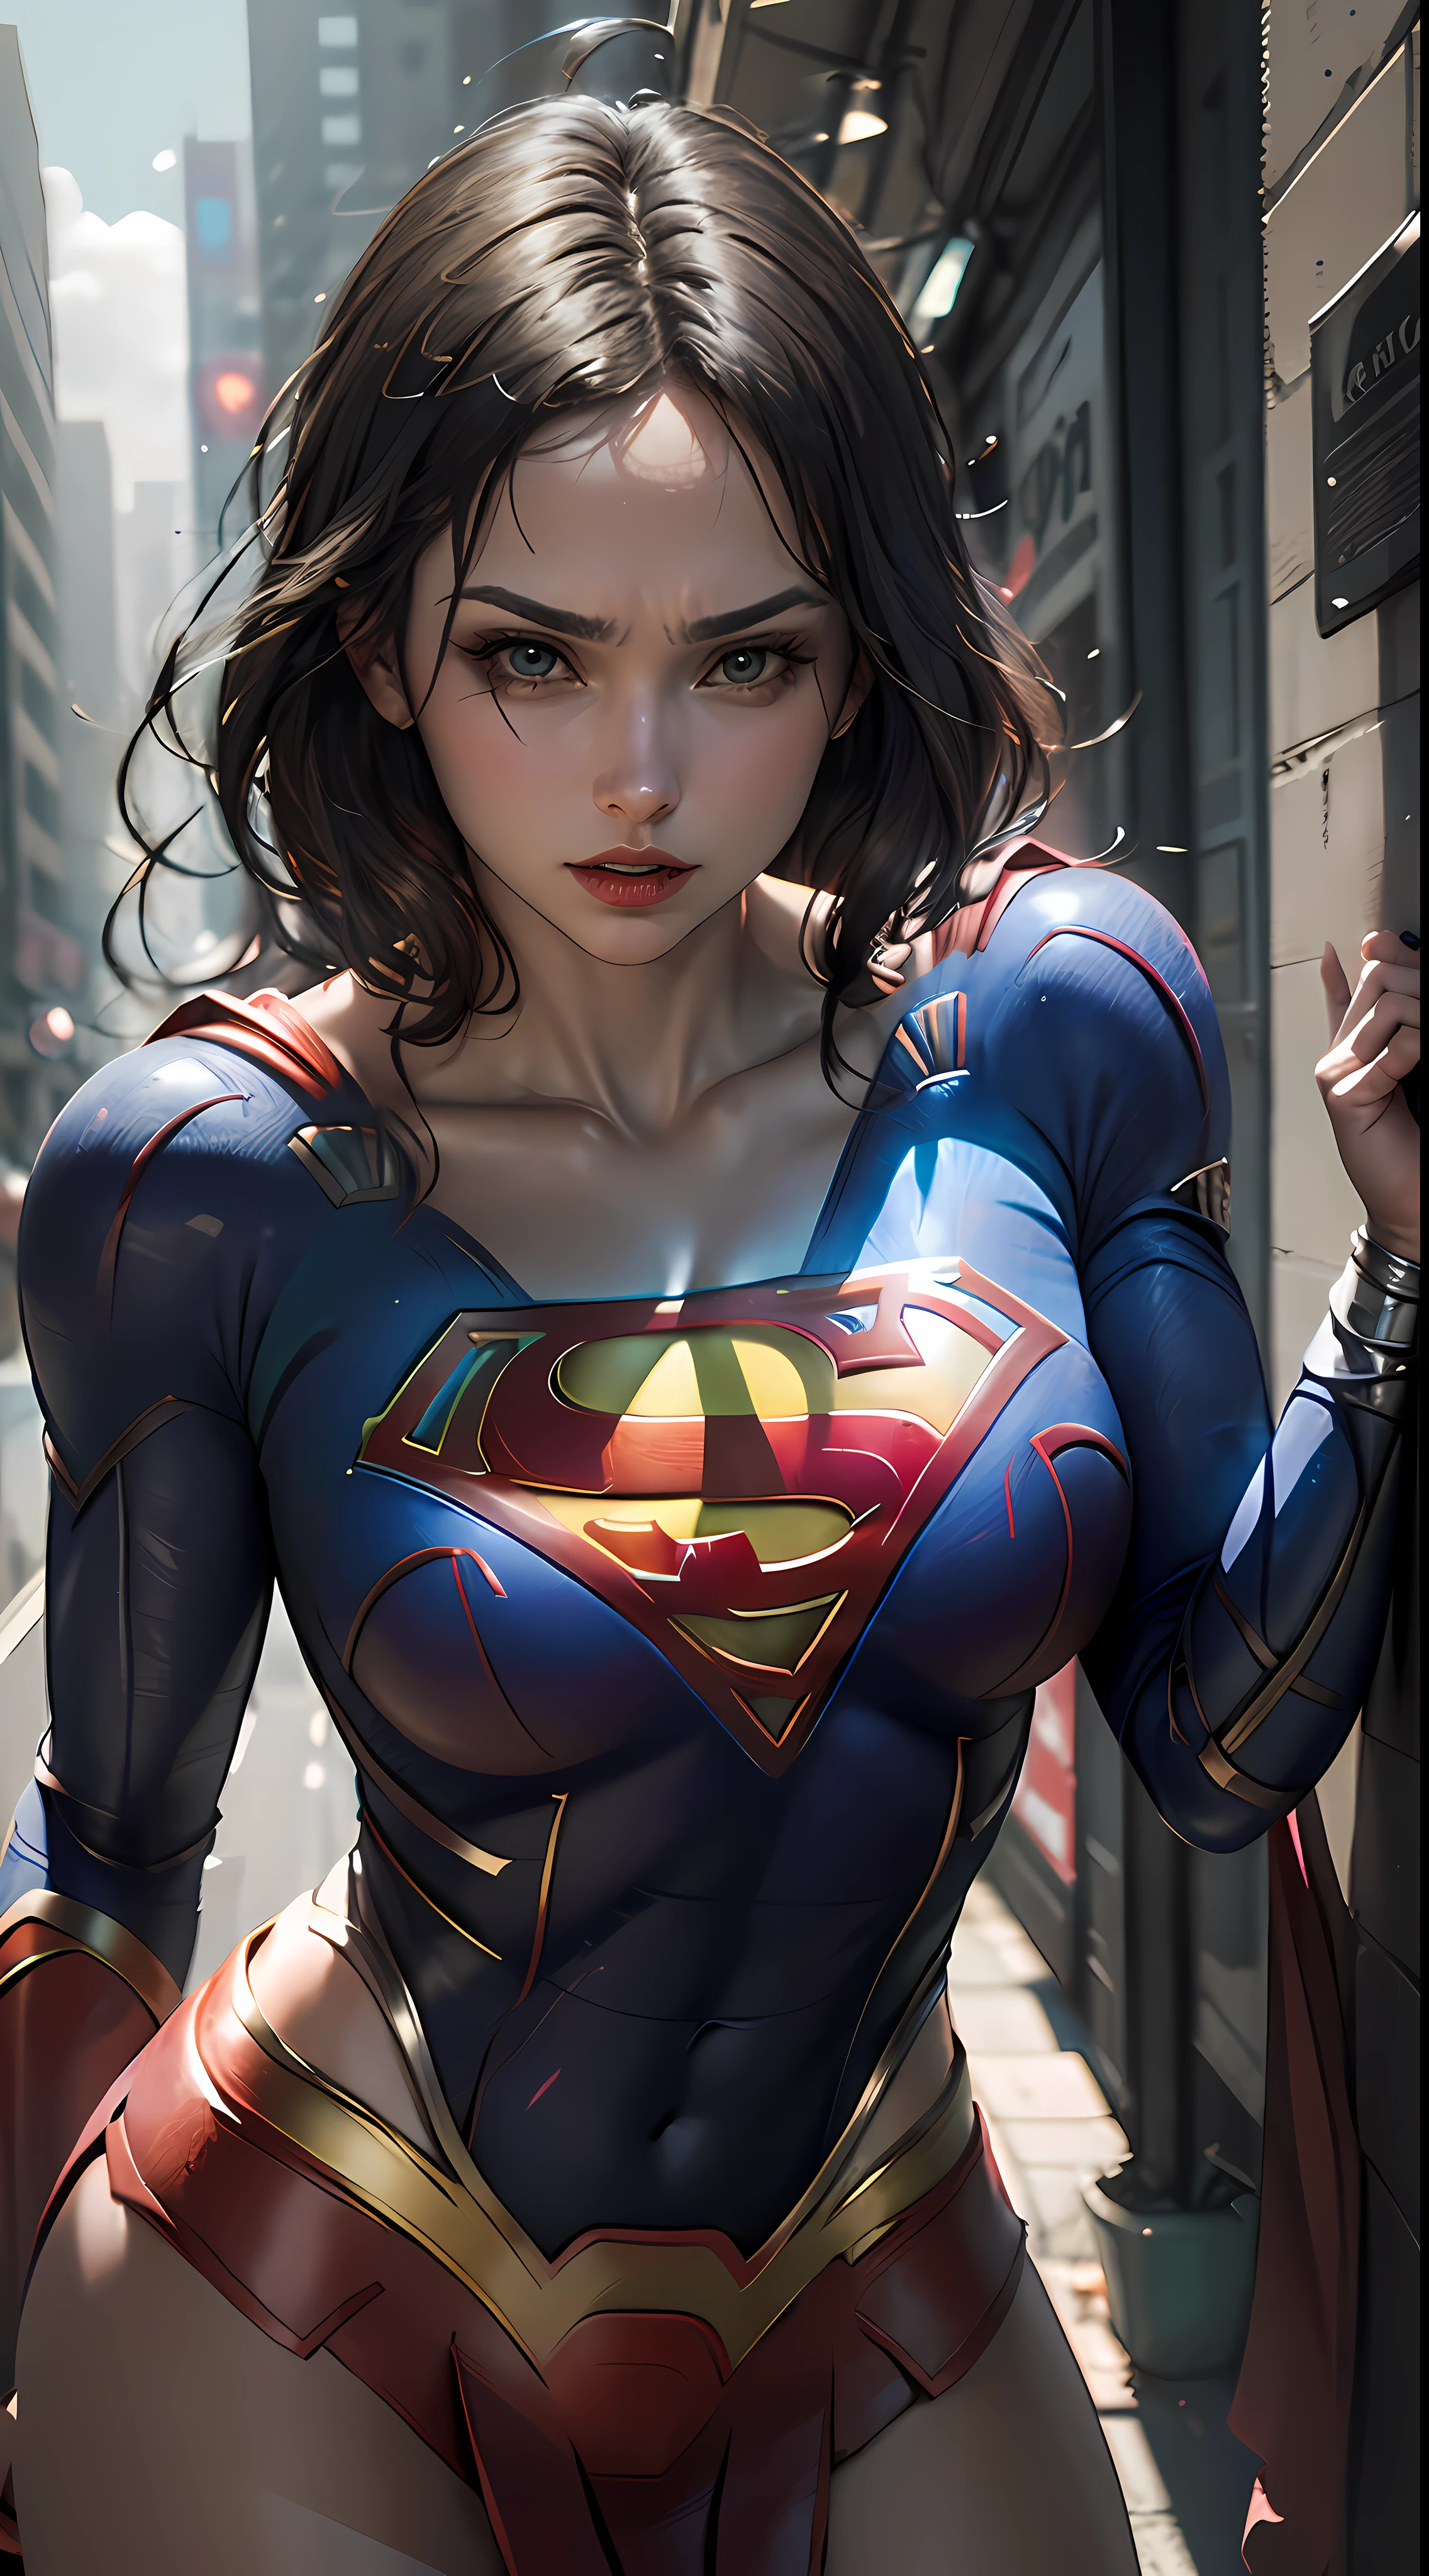 ((Best Supergirl Quality)), ((Masterpiece)), (Detailed: 1.4), 3D, a Detailed Image to Actress Imogen Poots Cyberpunk,HDR (High Dynamic Range),Ray Tracing,NVIDIA RTX,Super-Resolution,Unreal 5,Subsurface Scattering, PBR Texture, Post-processing, Anisotropic Filtering, Depth of Field, Maximum Clarity and Sharpness, Multilayer Textures, Albedo and Specular Maps, Surface Shading, Accurate Simulation of Light-Material Interaction, Perfect Proportions,  Octane Render, Two-Tone Lighting,Wide Aperture,Low ISO,White Balance,Rule of Thirds,8K RAW, using Superman S symbol on chest. Cyberpunk.